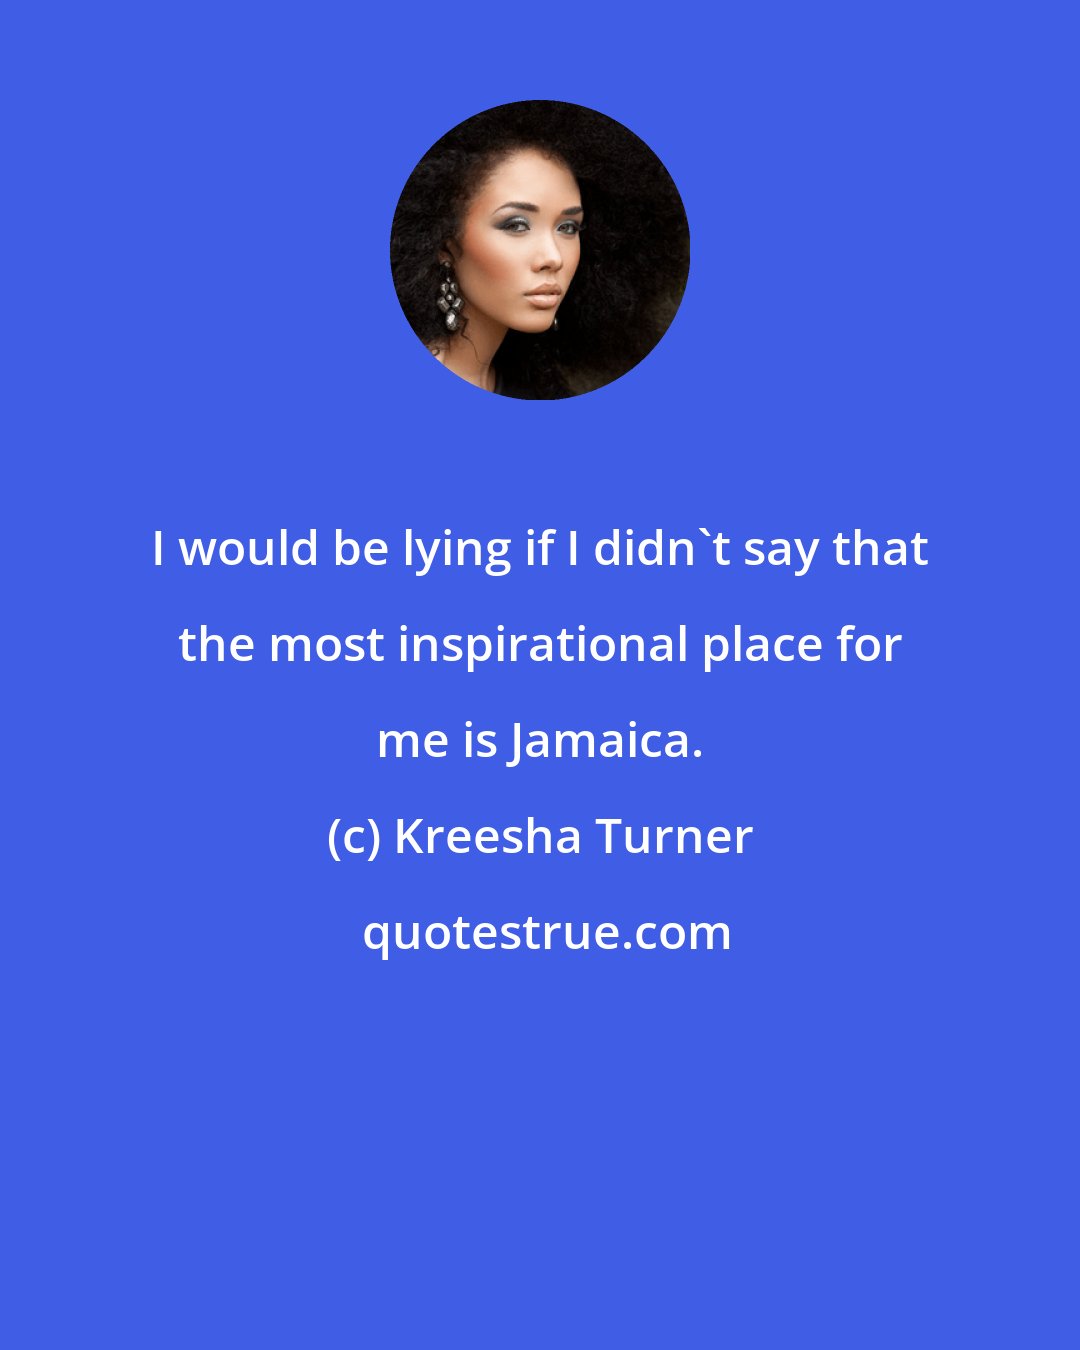 Kreesha Turner: I would be lying if I didn't say that the most inspirational place for me is Jamaica.